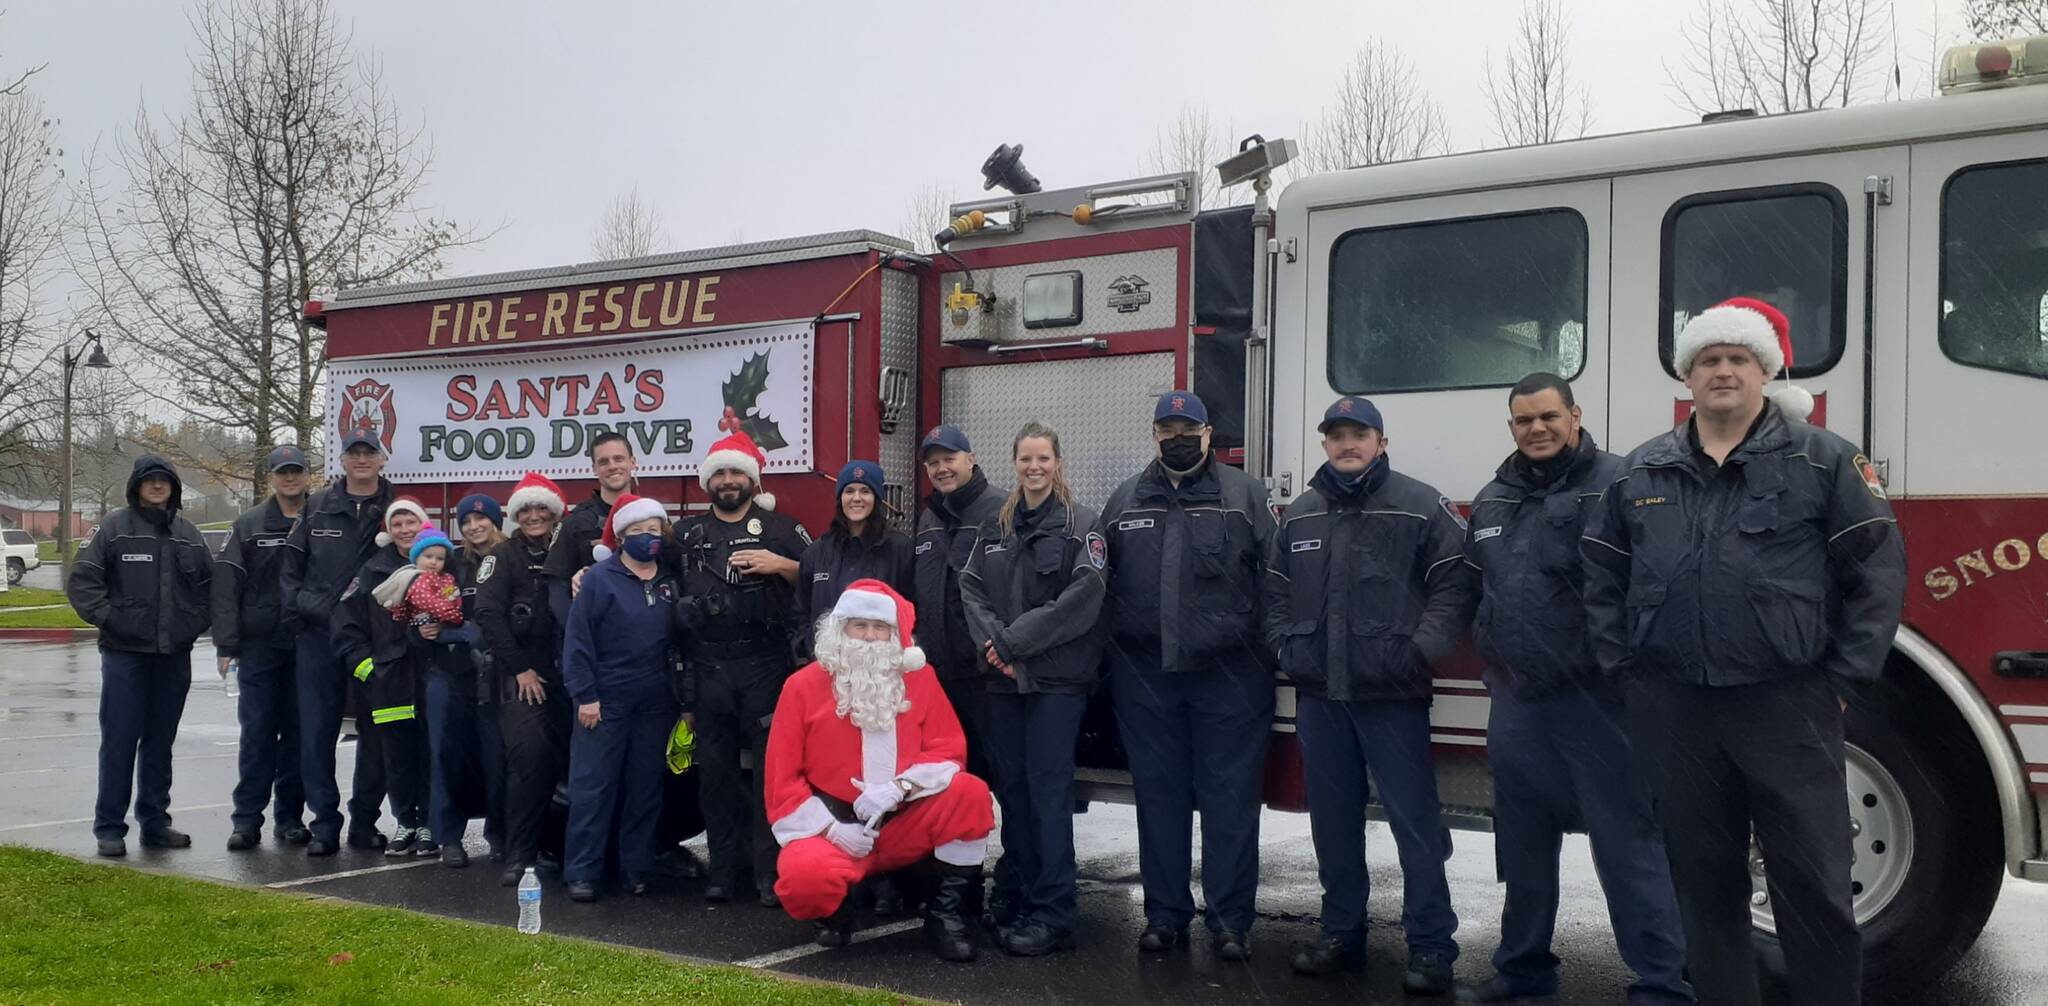 The Snoqualmie Fire and Police Department participated in the second annual Santa Parade and Food Drive on Dec. 18, to benefit the Helping Hands Ministry Backpack Program. The group provided food for over 200 kids who face food insecurity and provided gifts to 262 kids in the Valley. Courtesy photo